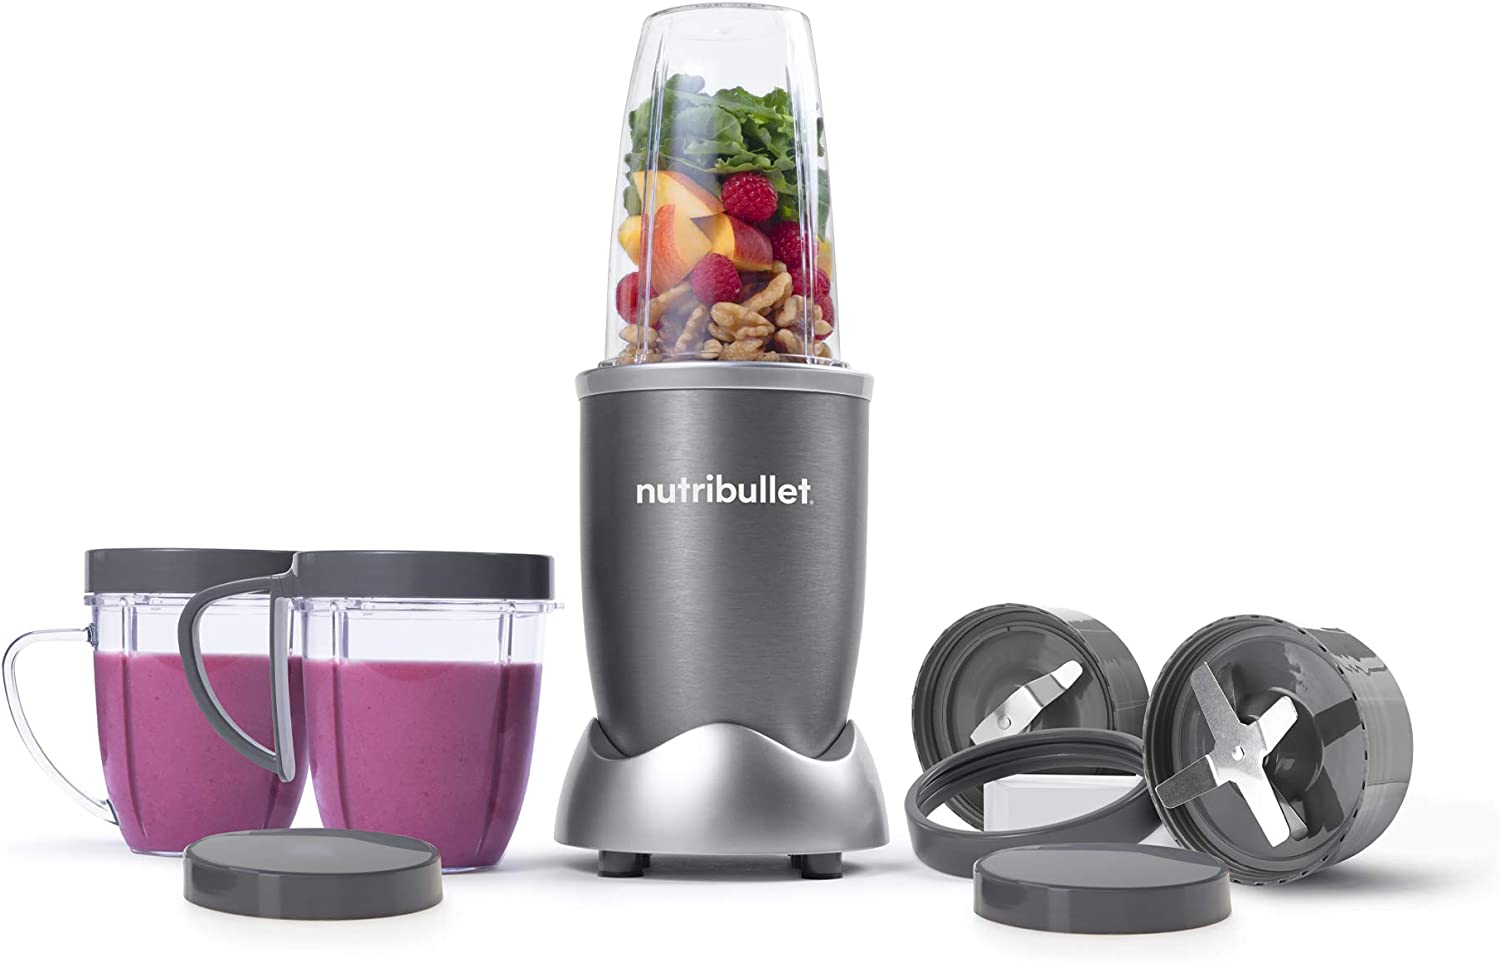 Nutribullet is the one of the most popular personal blenders on the market